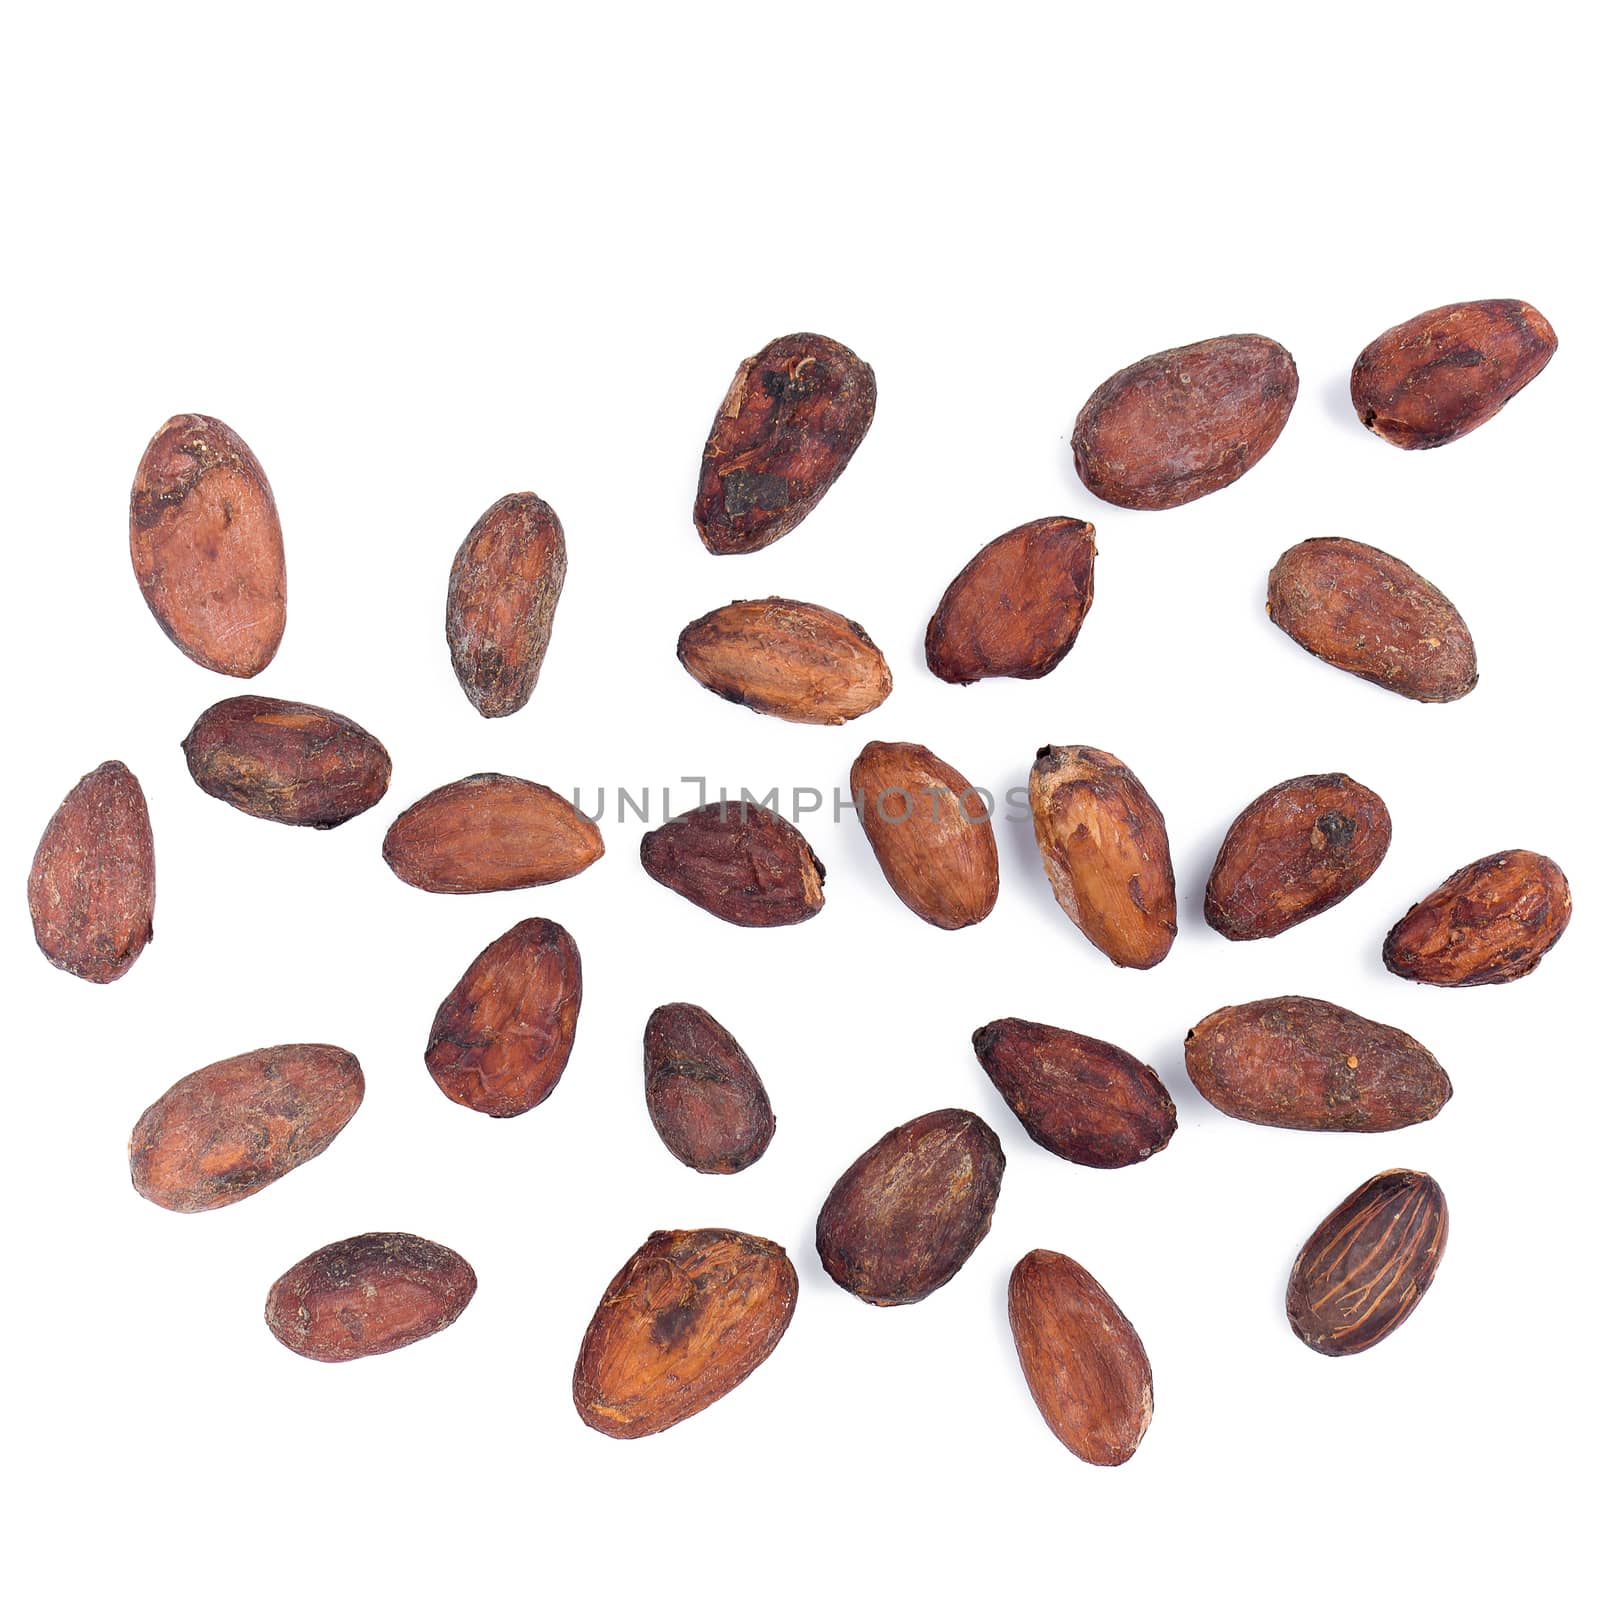 Cacao fruit, raw cacao beans, Cocoa pod isolated on white backgr by kaiskynet